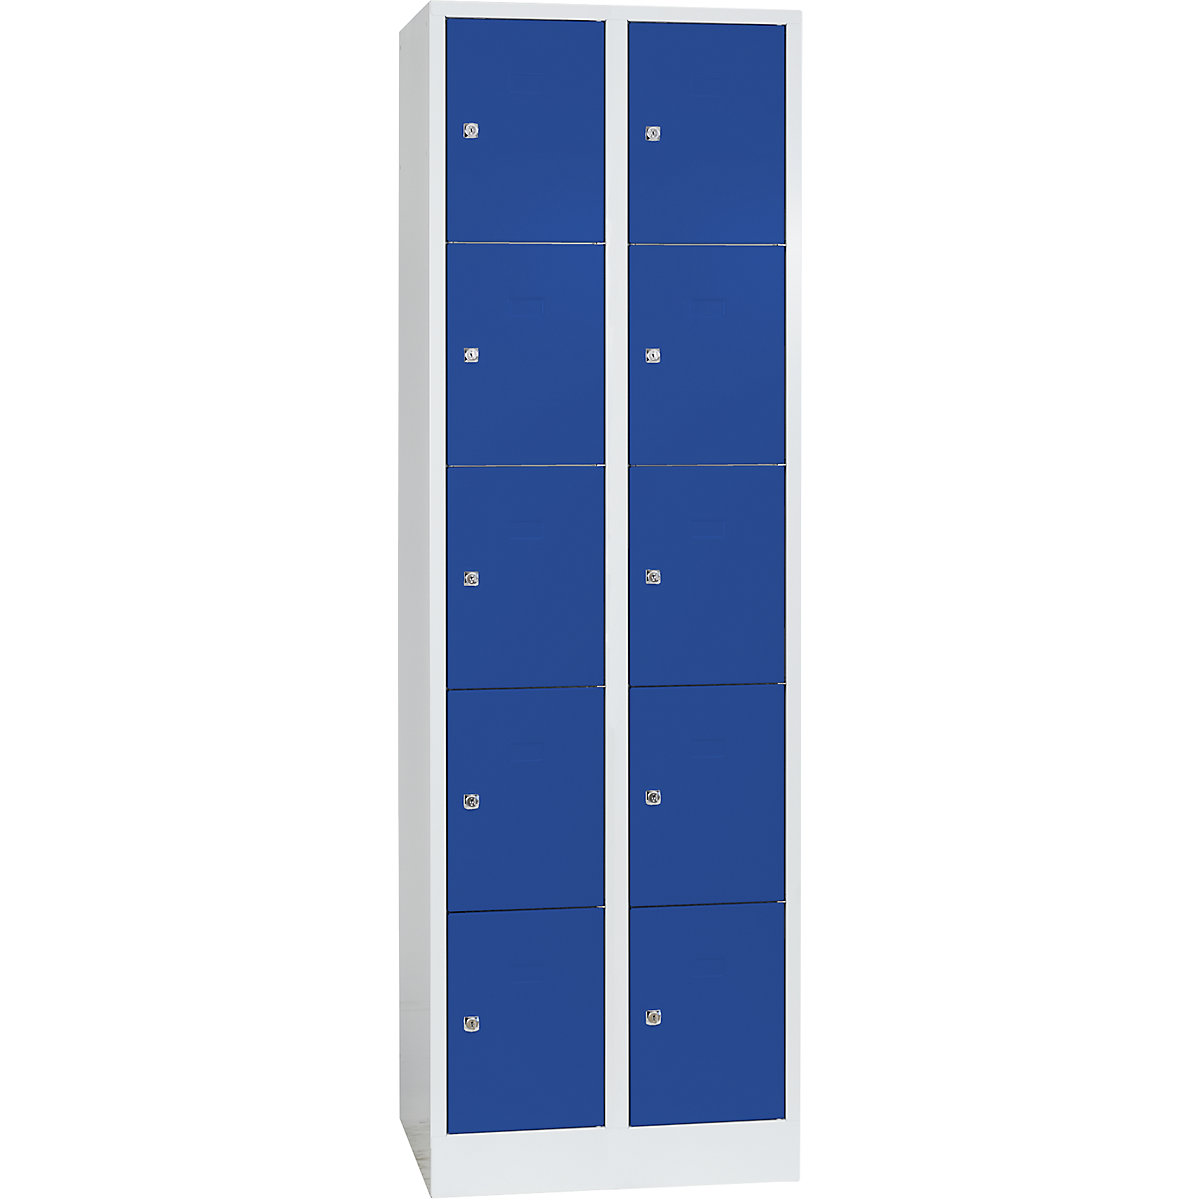 Cloakroom locker system – Wolf, 10 compartments, compartment width 300 mm, gentian blue / light grey-3